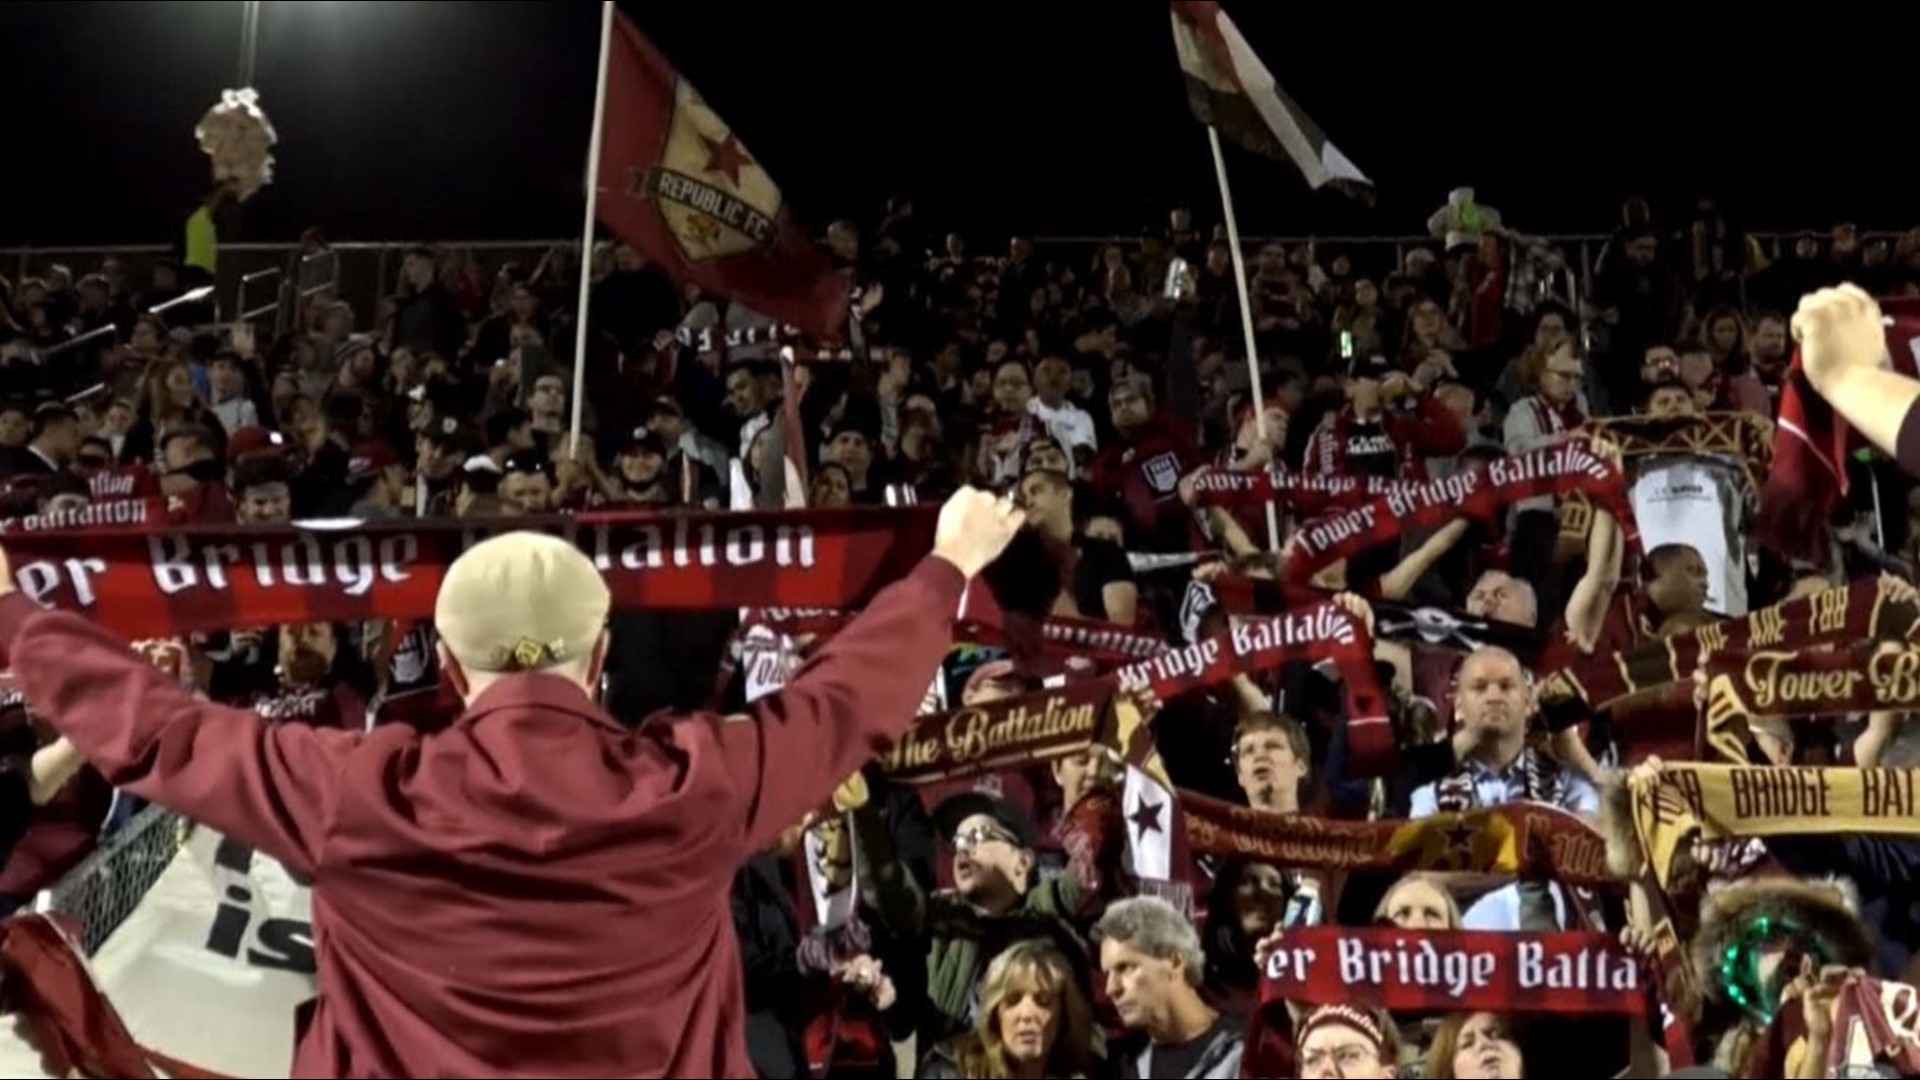 One month after parting ways with its head and assistant coaches, the Sacramento Republic FC announced the hiring Mark Briggs as new head coach into 2020 season.